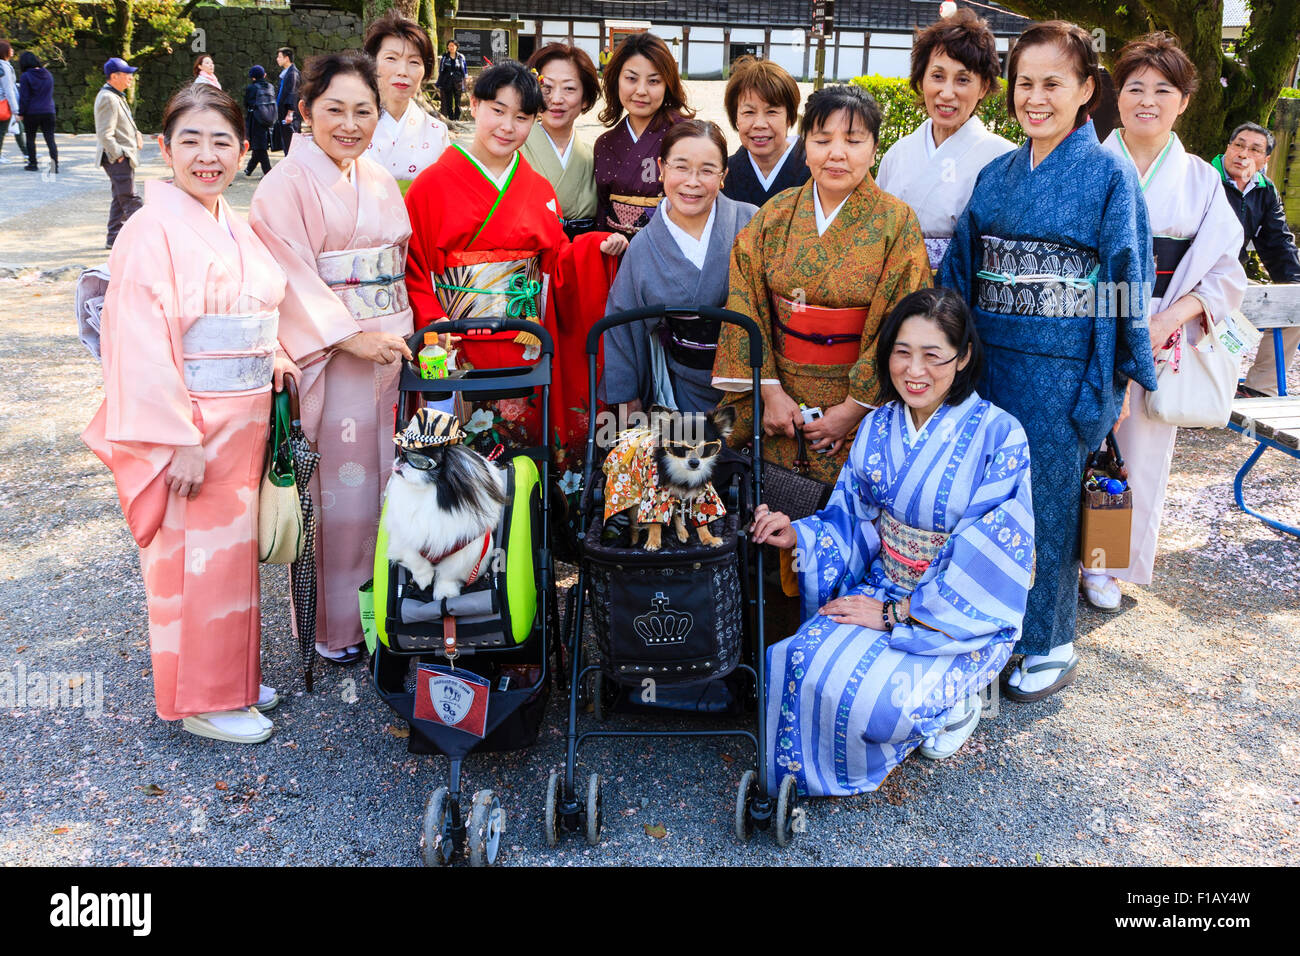 Group of smiling Japanese mature women in kimono standing around some pampered pet dogs sitting in pushchairs while posing for photograph. Stock Photo